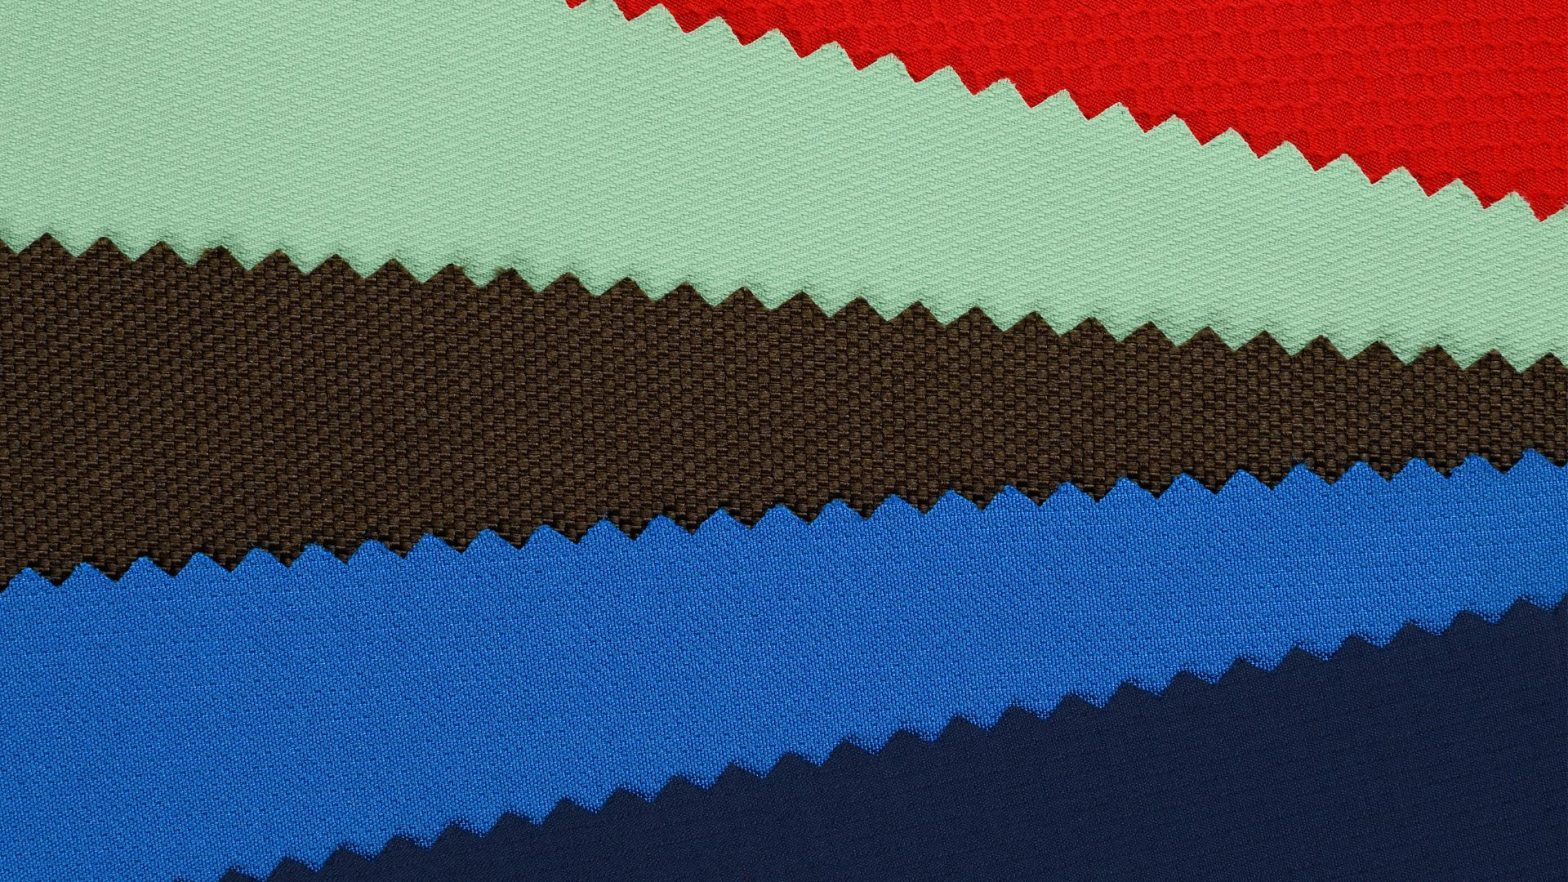 Recycled Polyester Fabric: Is It The Next Best Material?